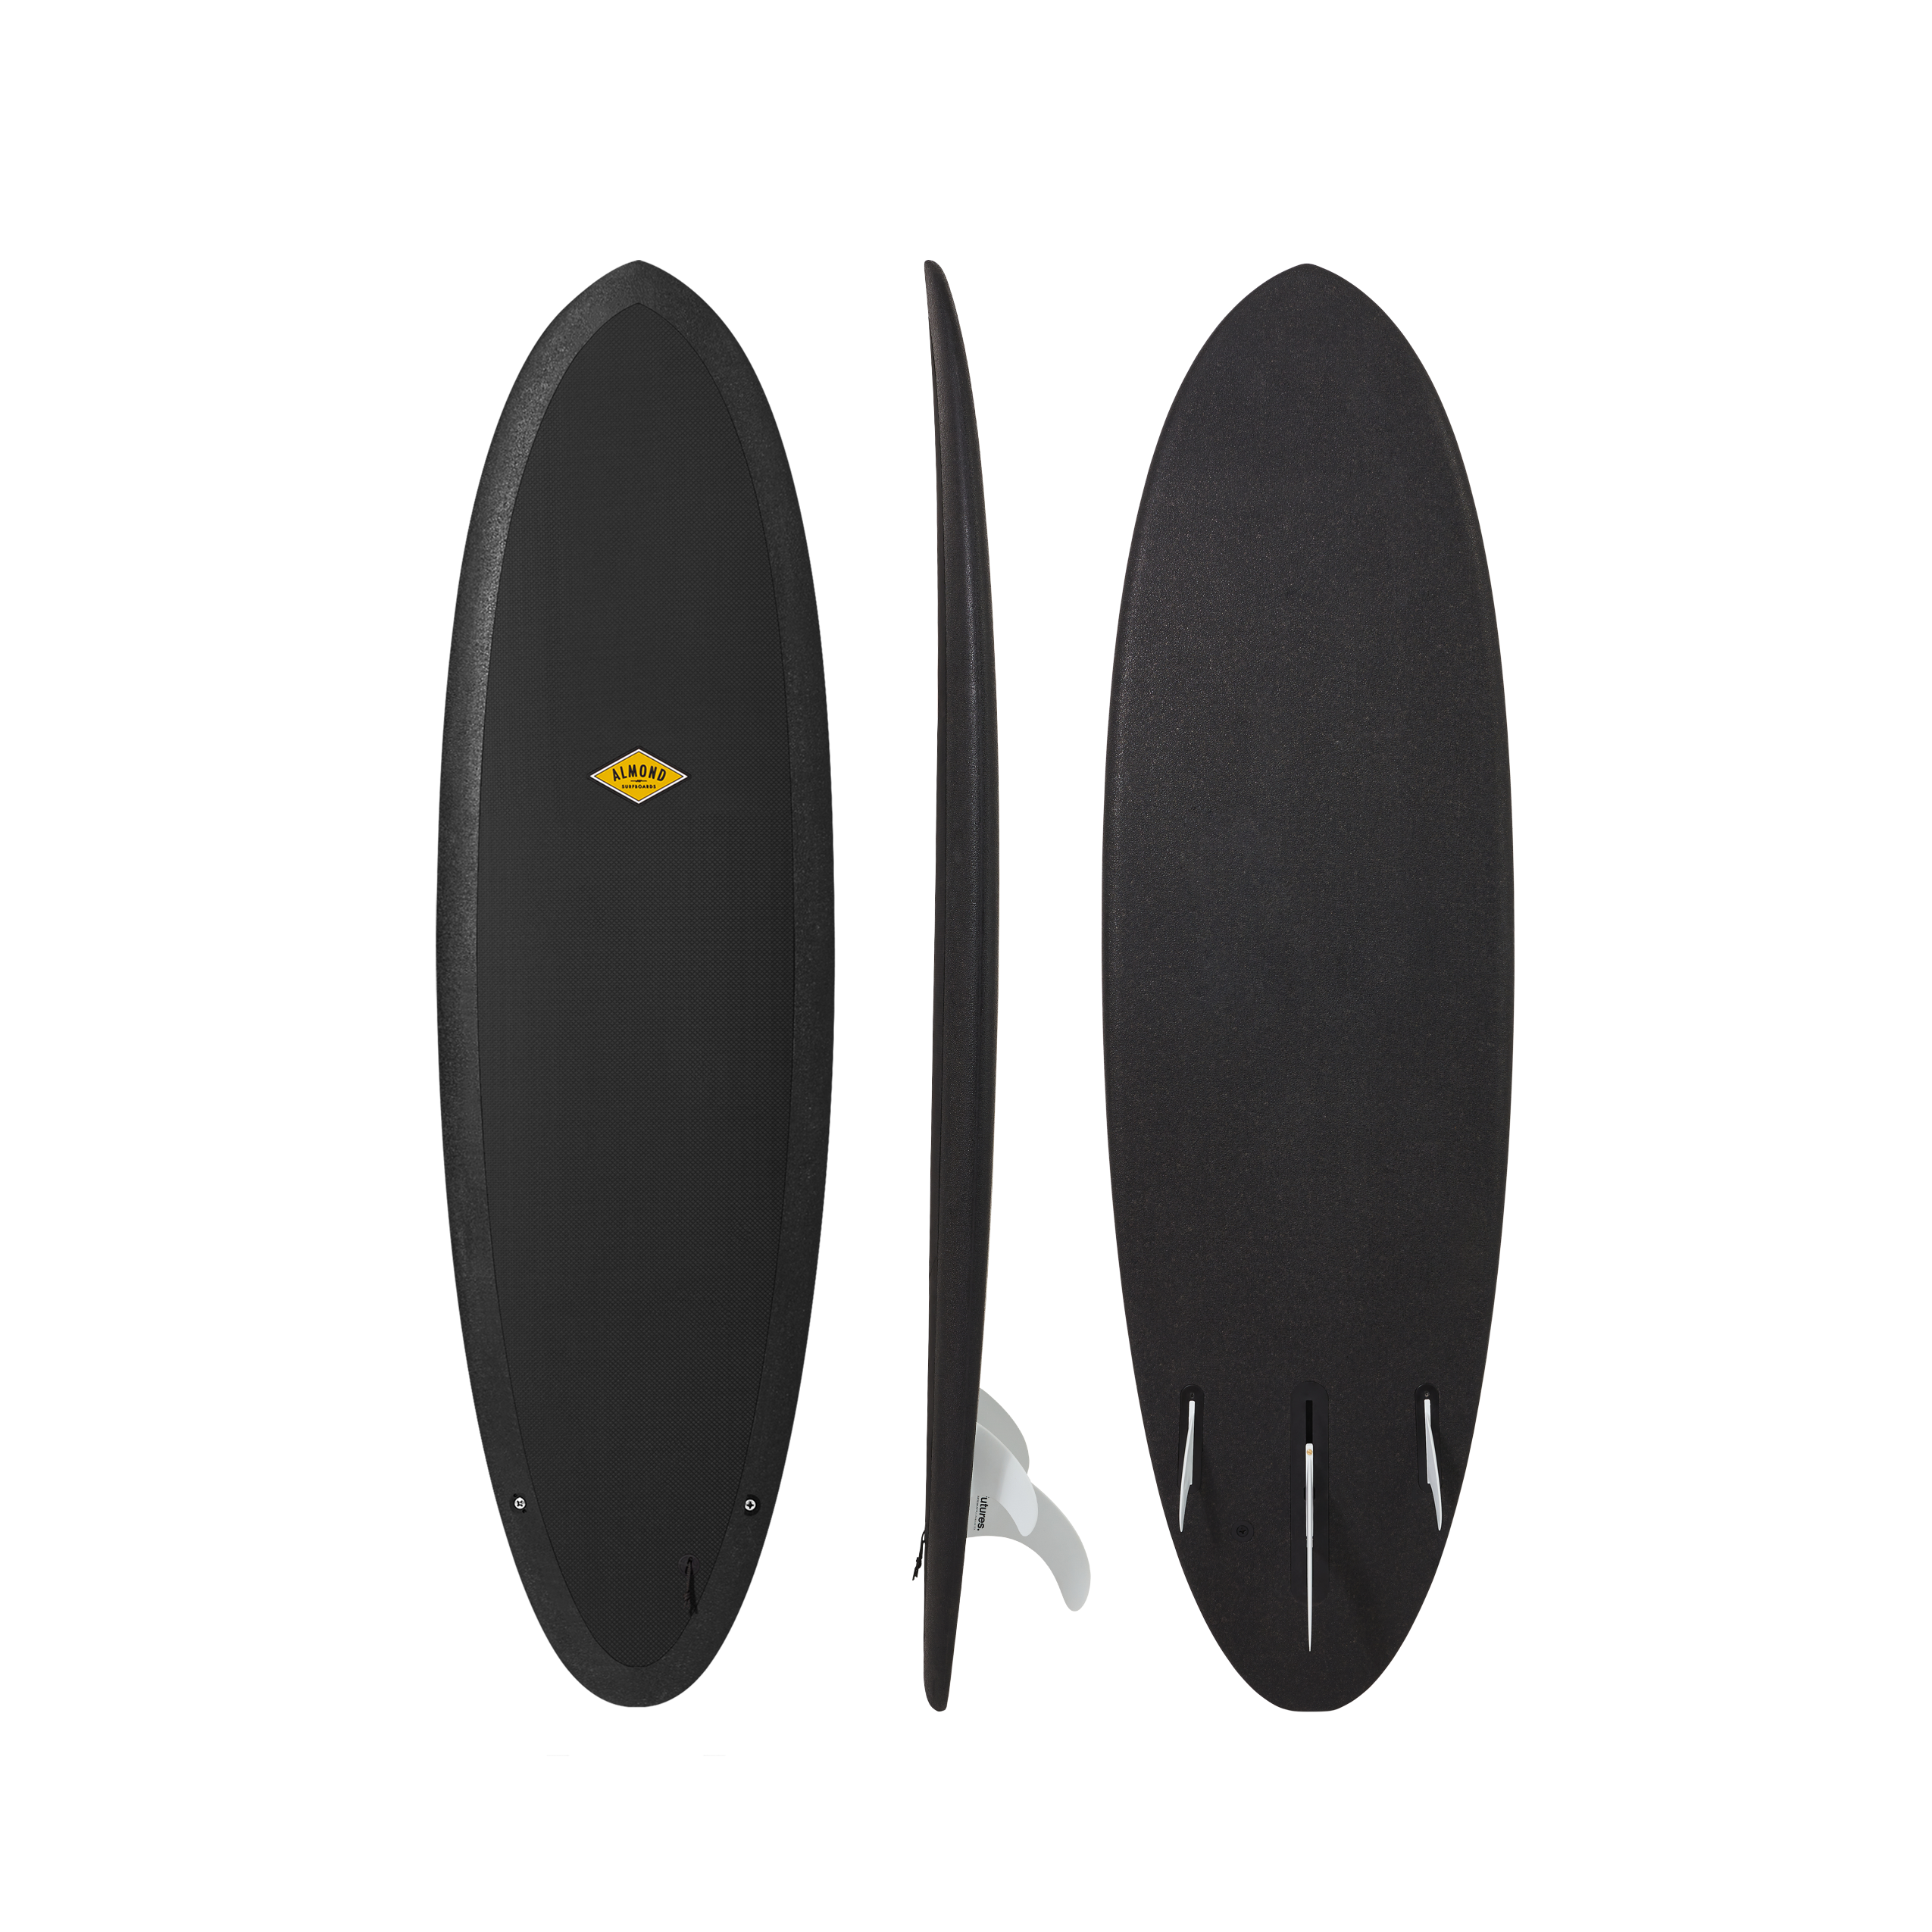 Front, Profile and back of a black 6 foot 4 inch Almond Plez Phez surfboard with a logo on a transparent background